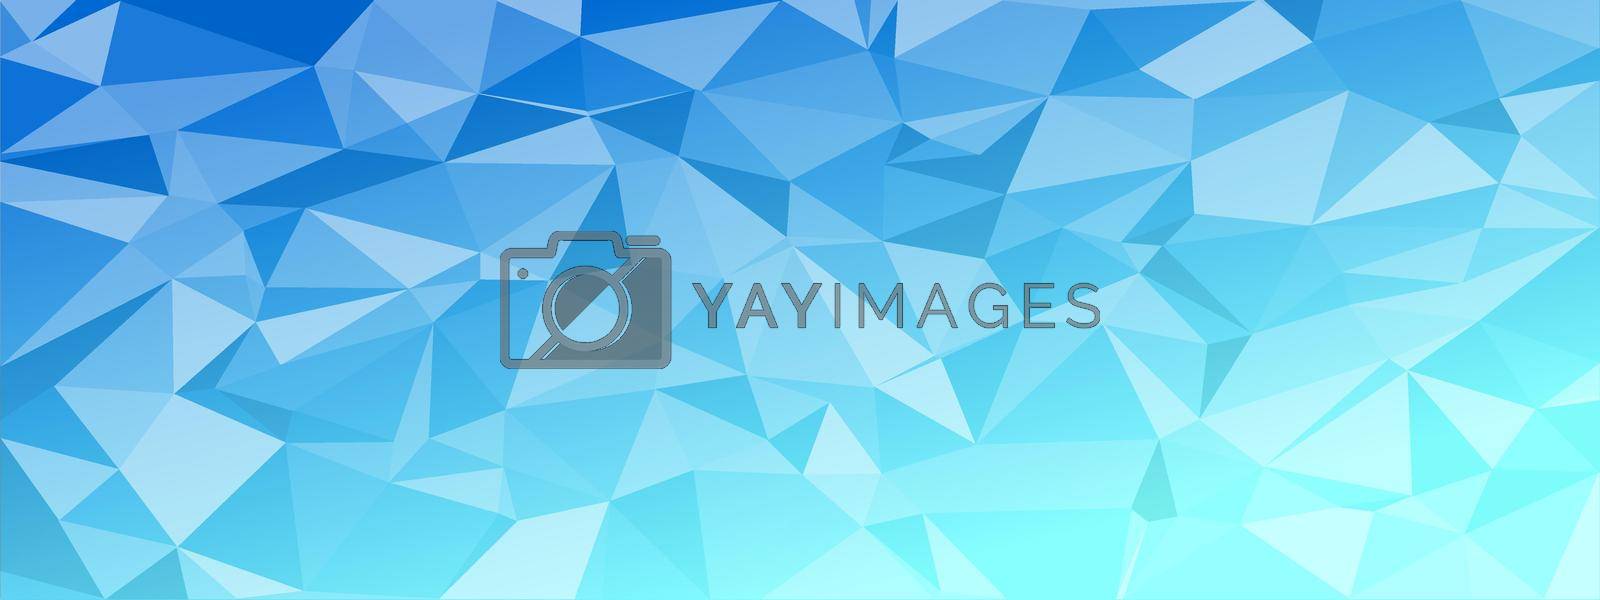 Royalty free image of low poly abstract modern background. bright color chaotic triangles of variable size and rotation. Minimalist layout for business card landing page wallpaper website brochure. Trendy vector eps10 by MariaTem